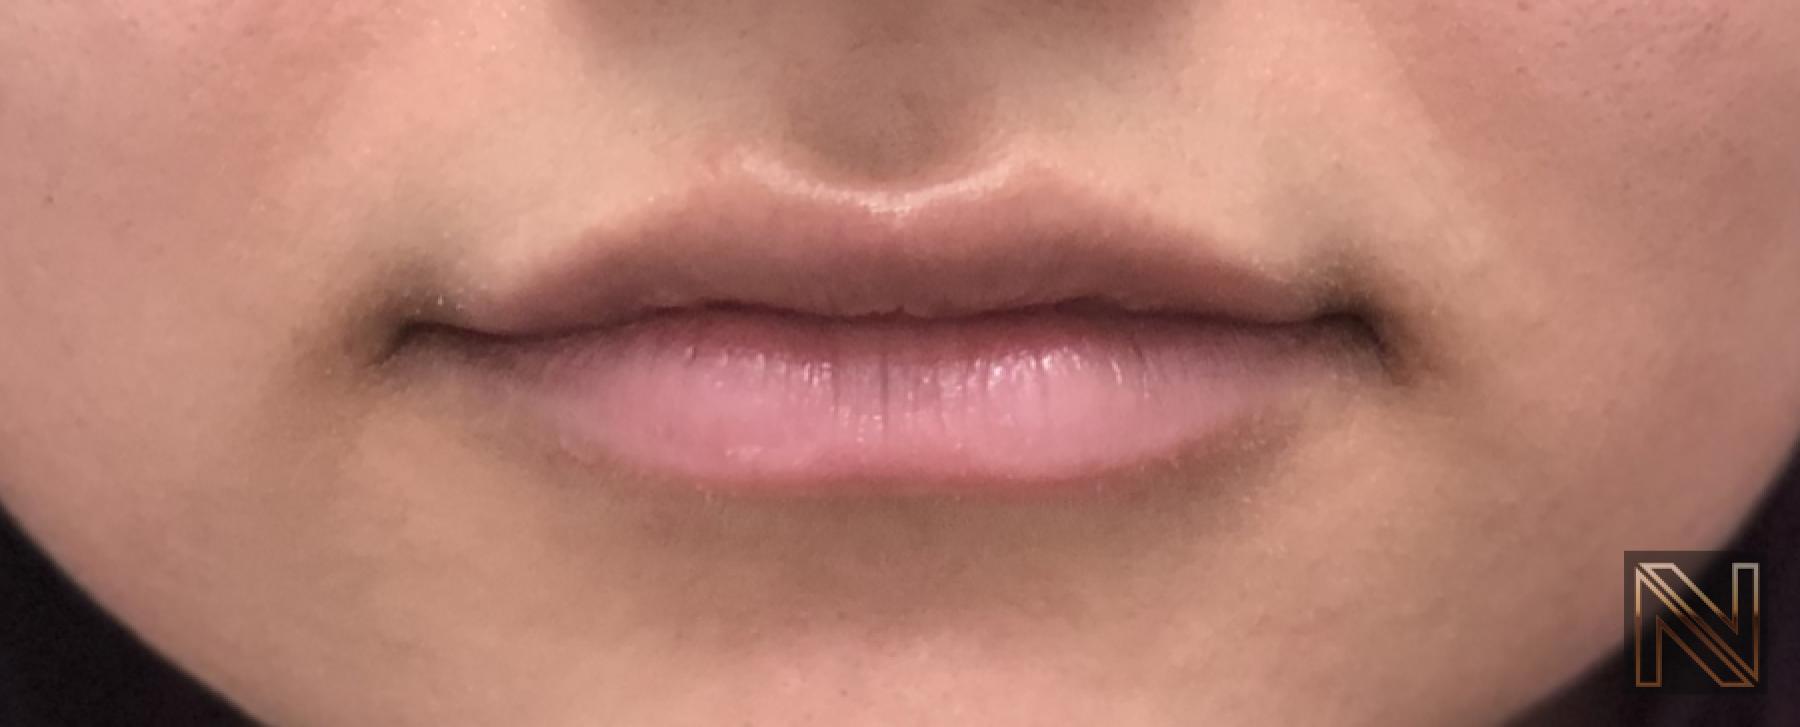 Fillers: Patient 8 - After  